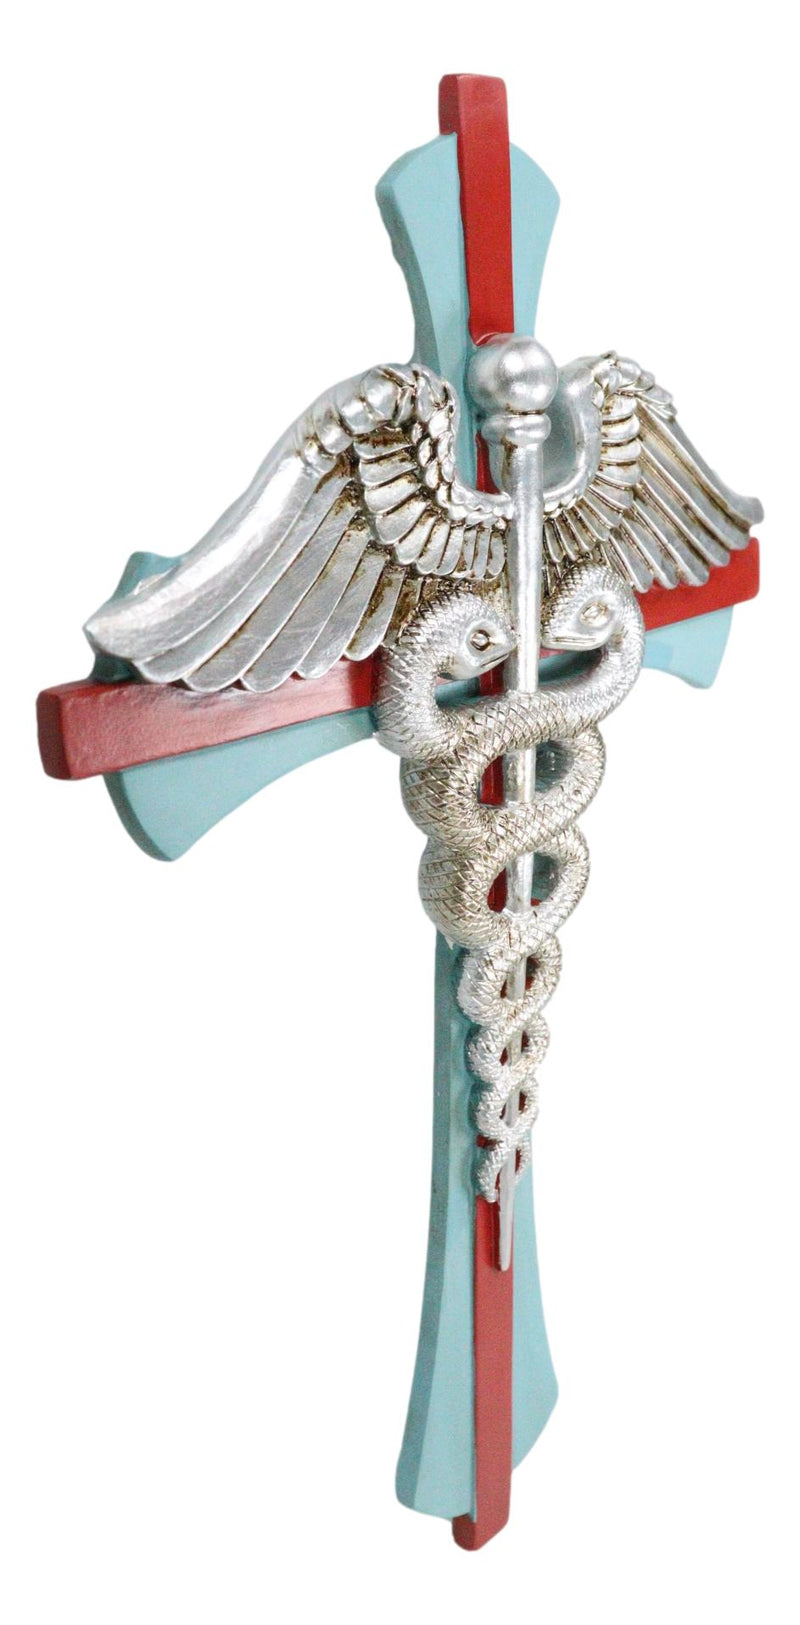 Physician Healer Caduceus Herald's Wand Entwined Serpents Winged Wall Cross